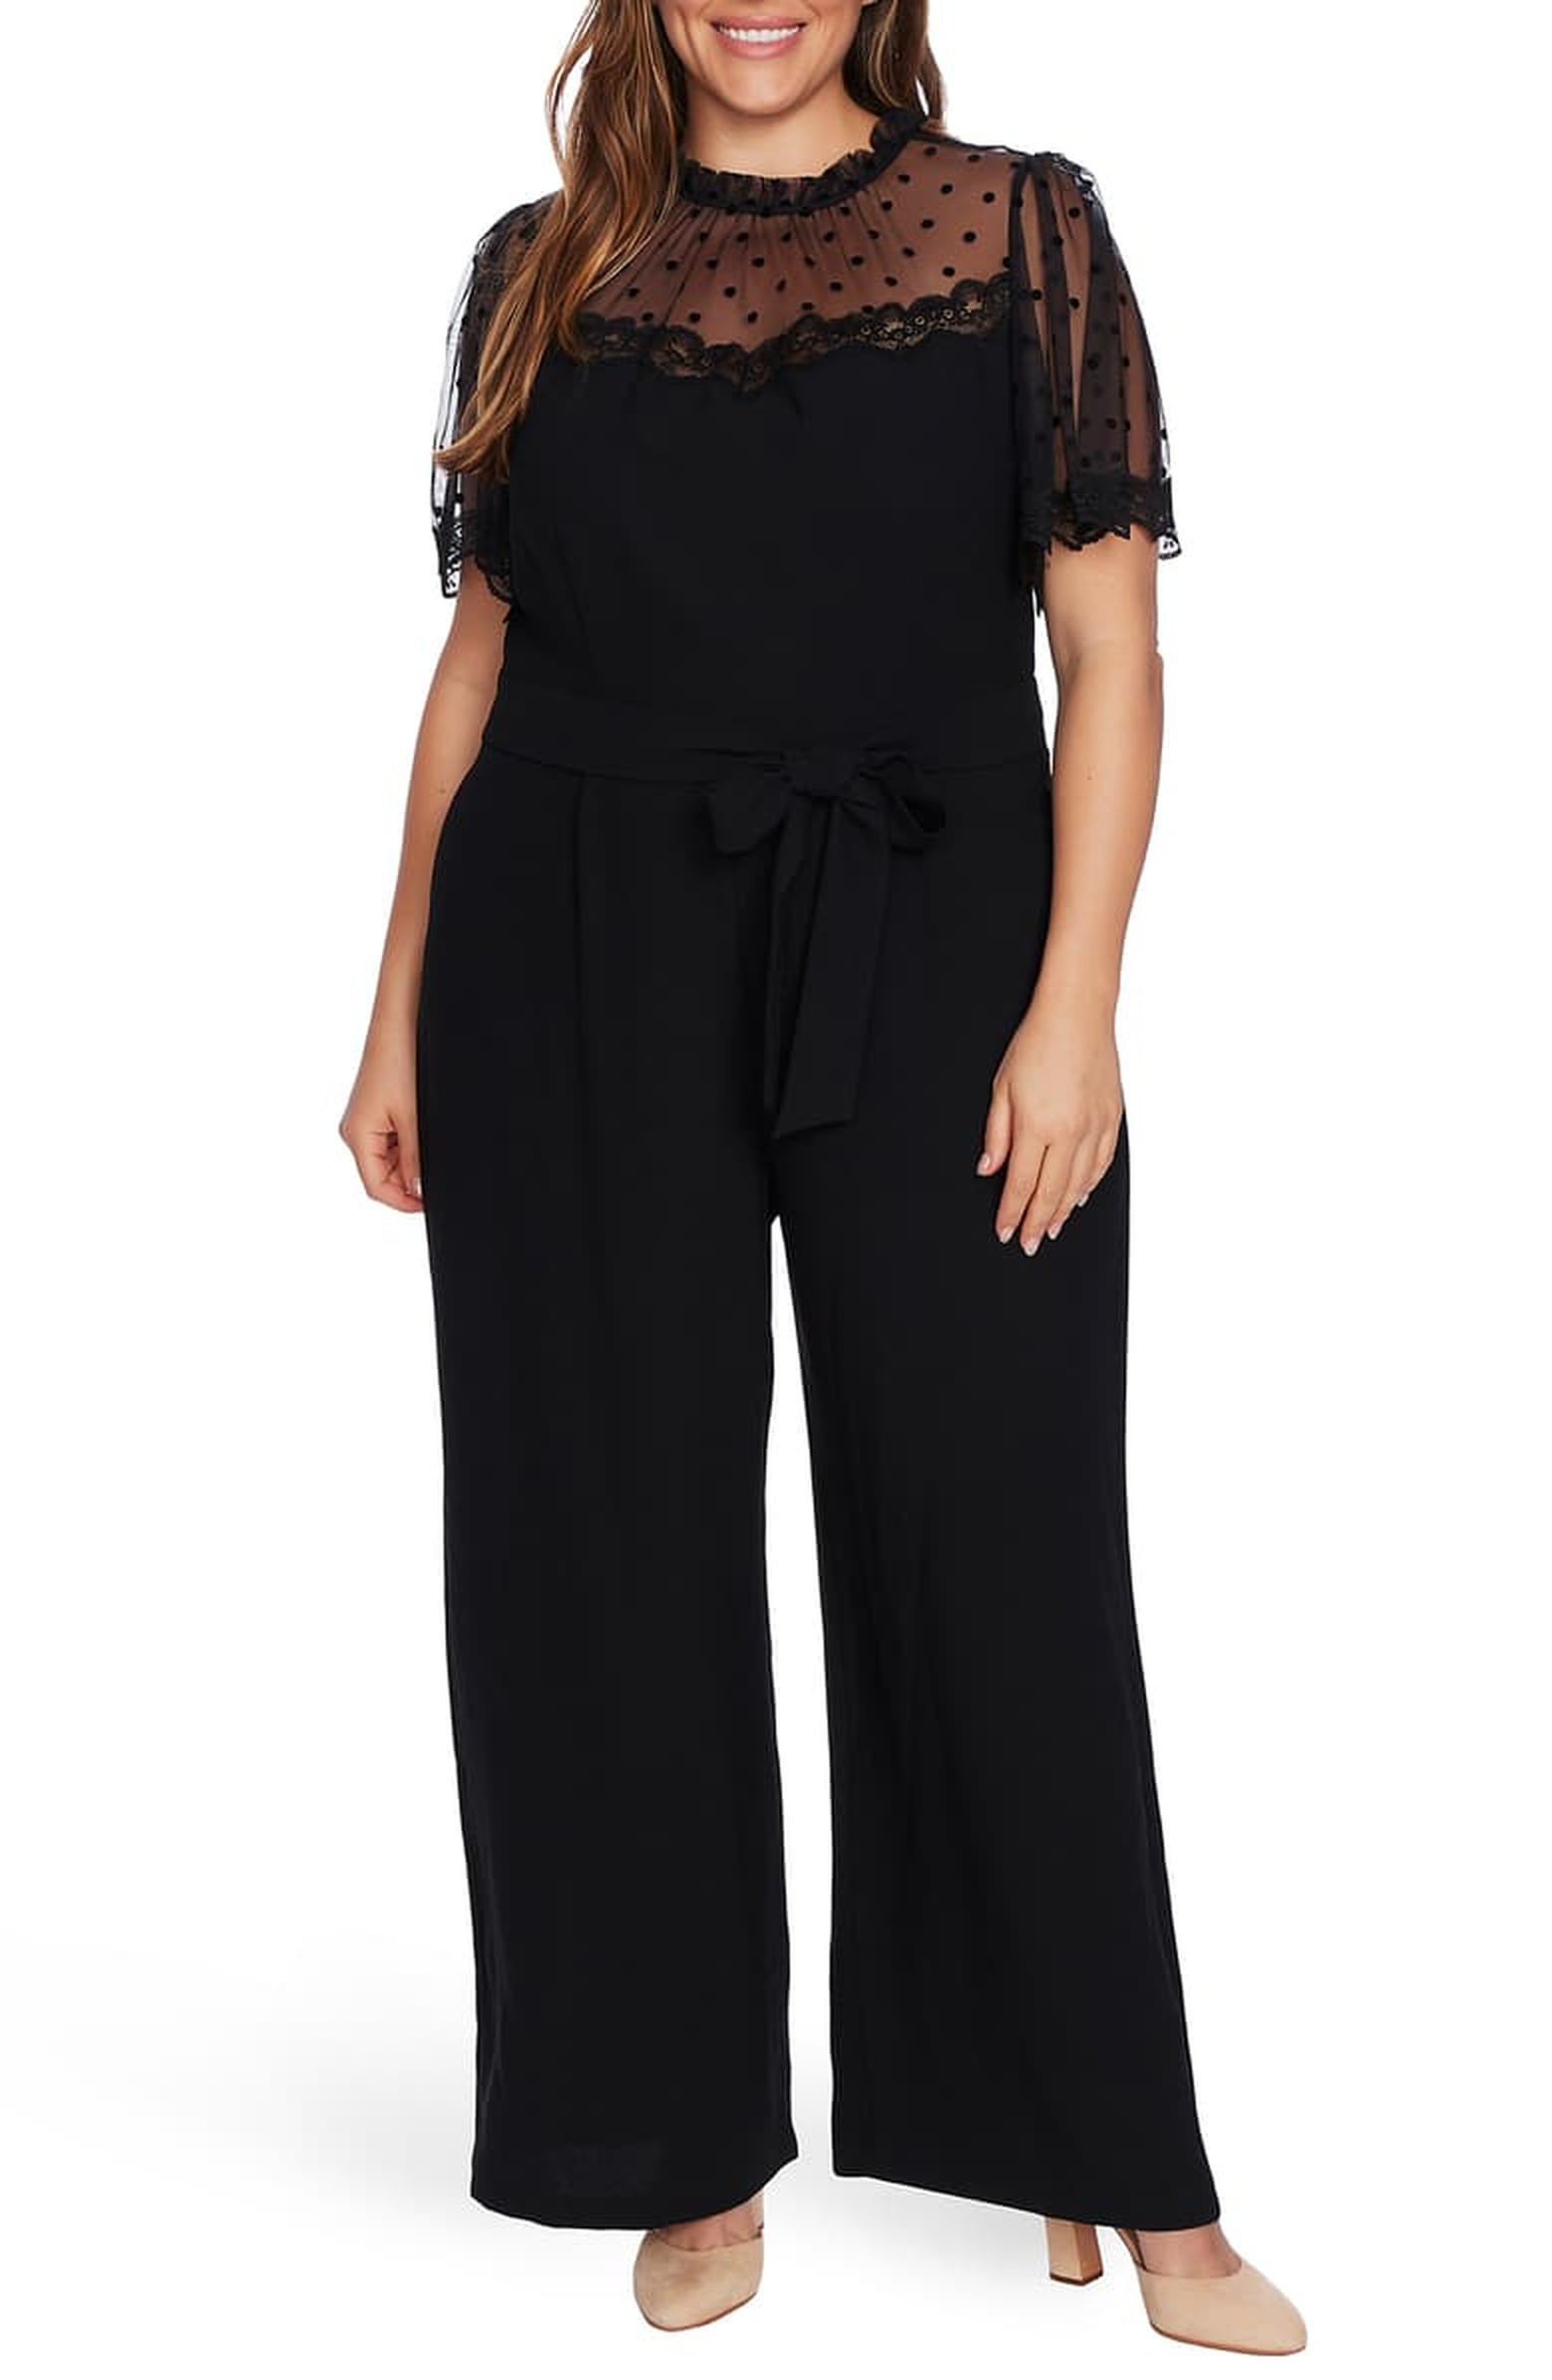 Best New Year's Eve Jumpsuits and Rompers | POPSUGAR Fashion